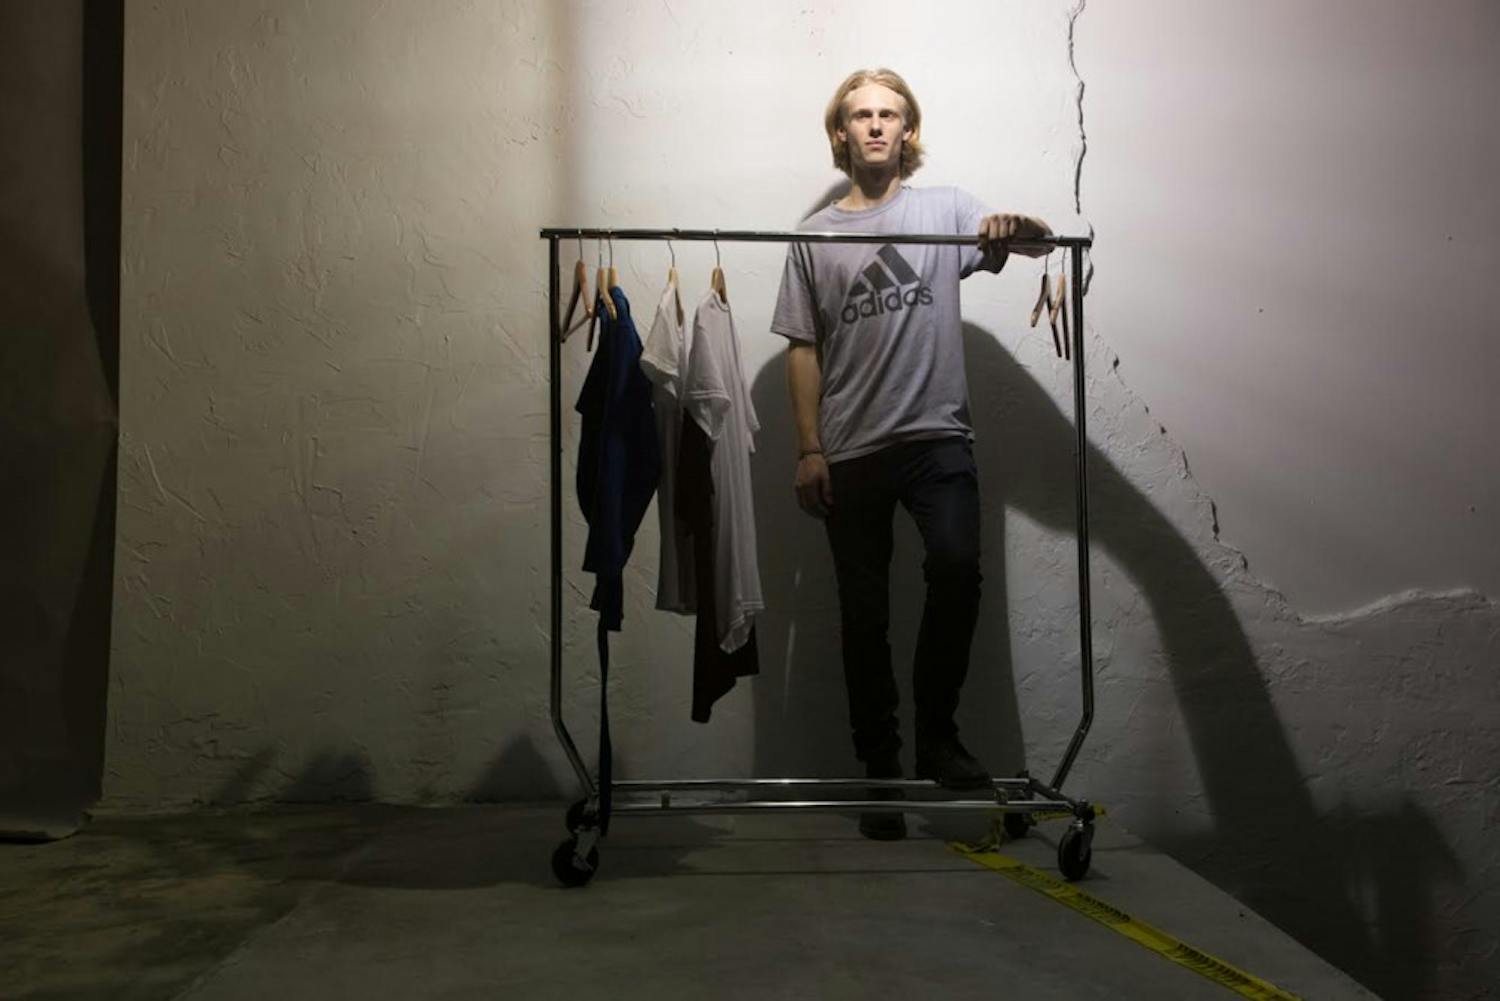 James Creissen, a sophomore business major, poses in front of a rack of clothes he designed. Creissen held a fashion show on East Rosemary Street Thursday night.